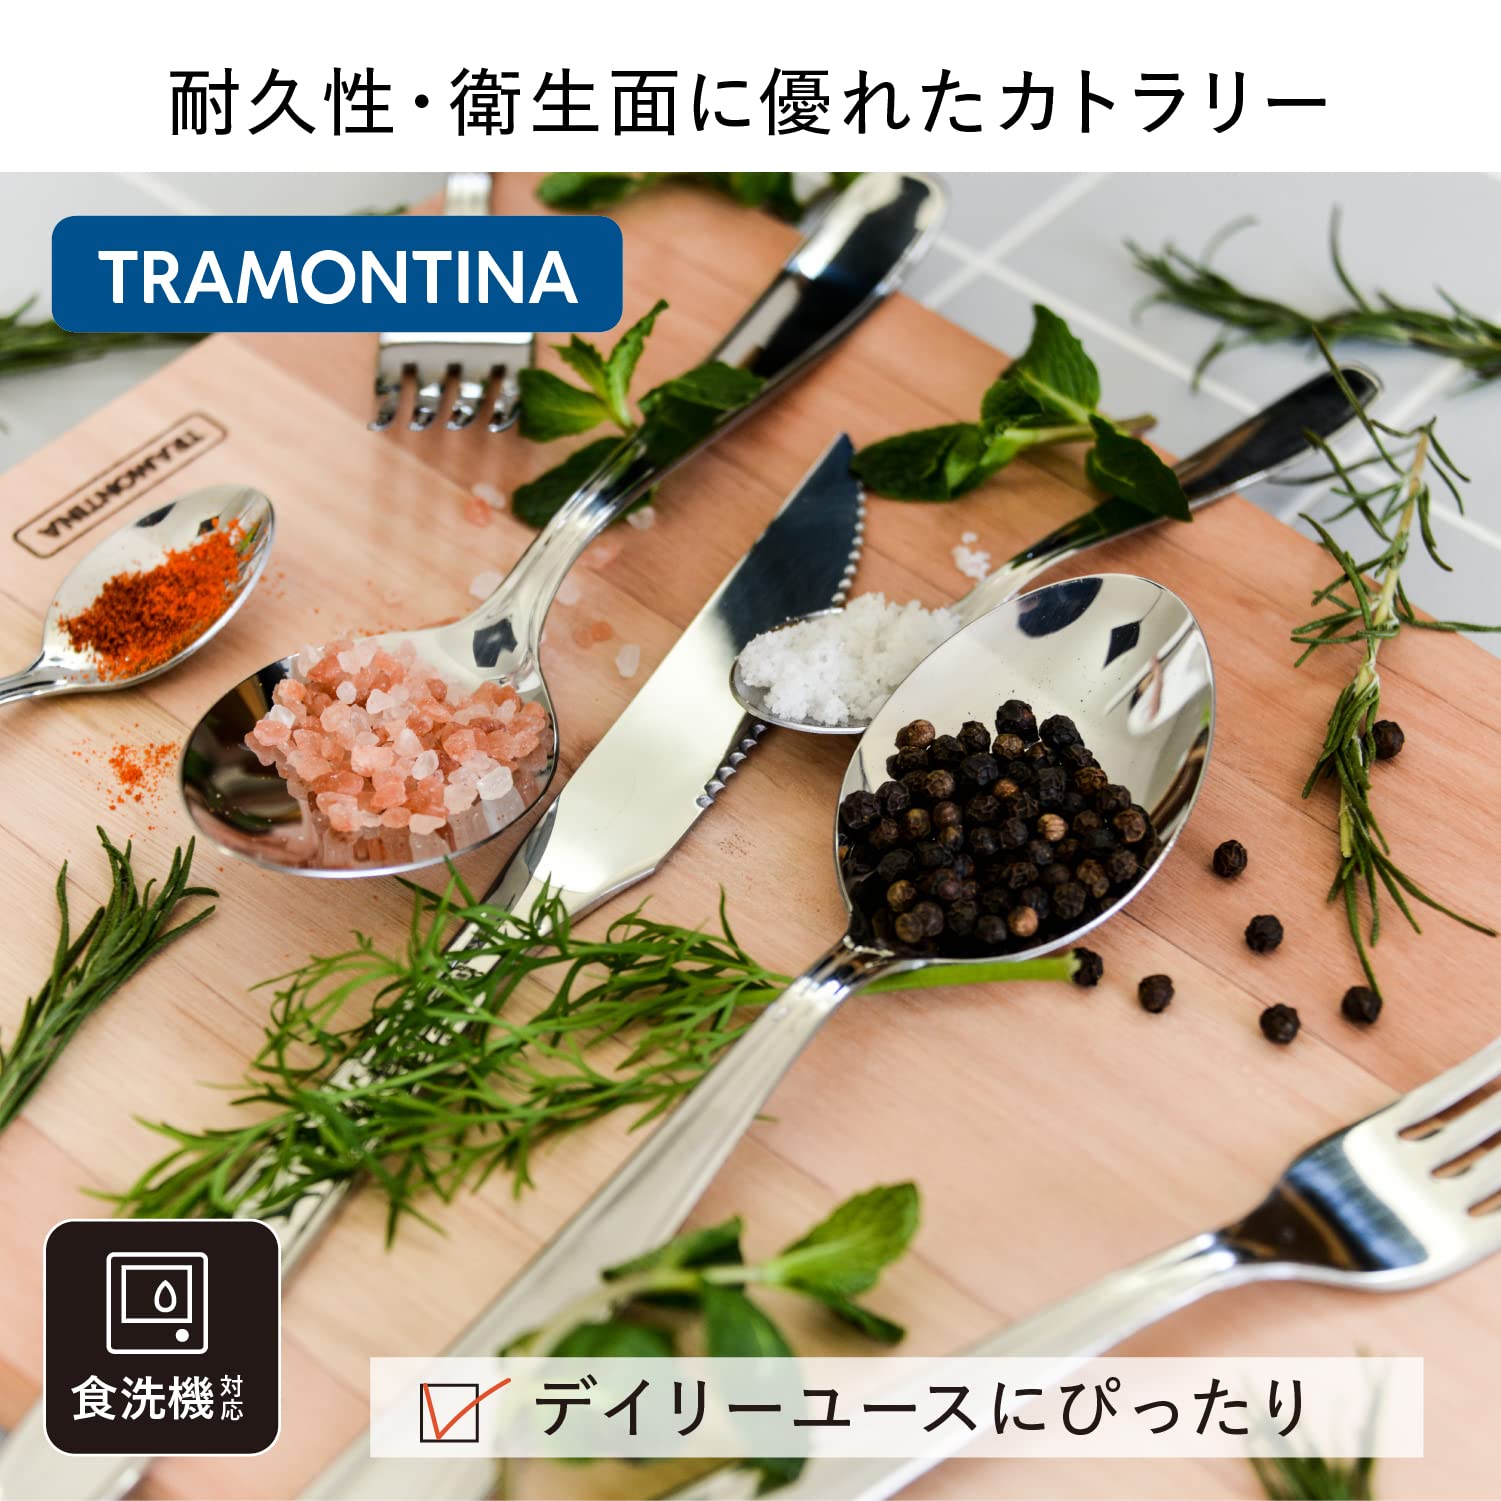 Tramontina 63902/027 Table Fork, Malaysia, 7.5 inches (19 cm), 18-10 Stainless Steel, Made in Brazil